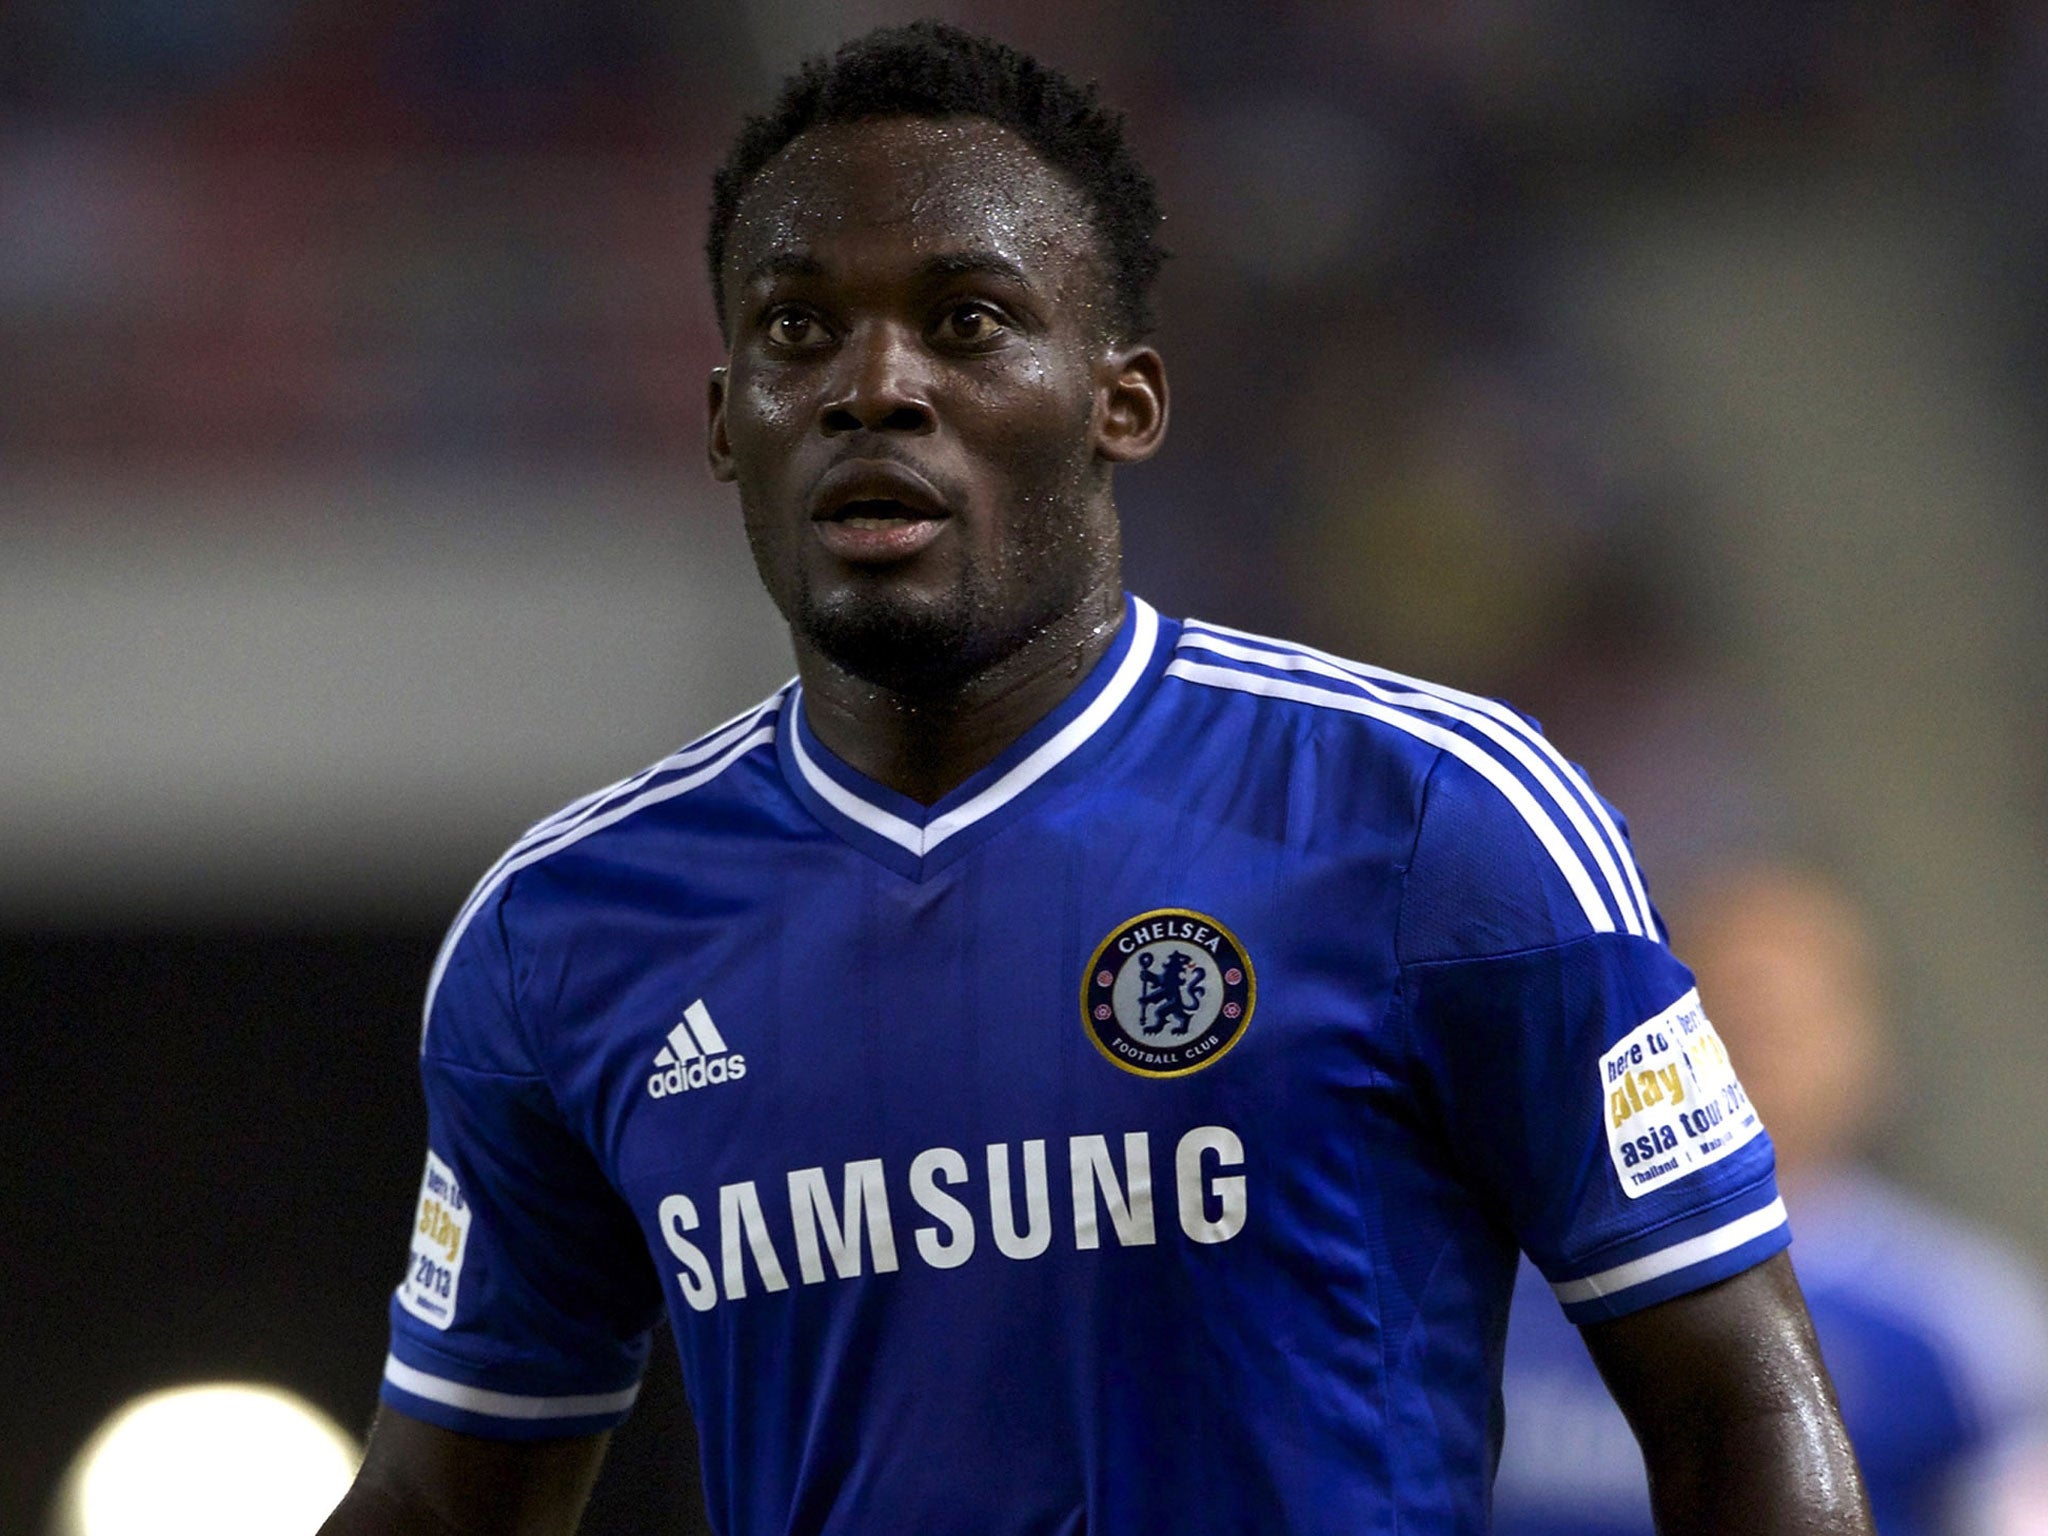 Michael Essien was introduced to local press by Jose Mourinho as 'my son'